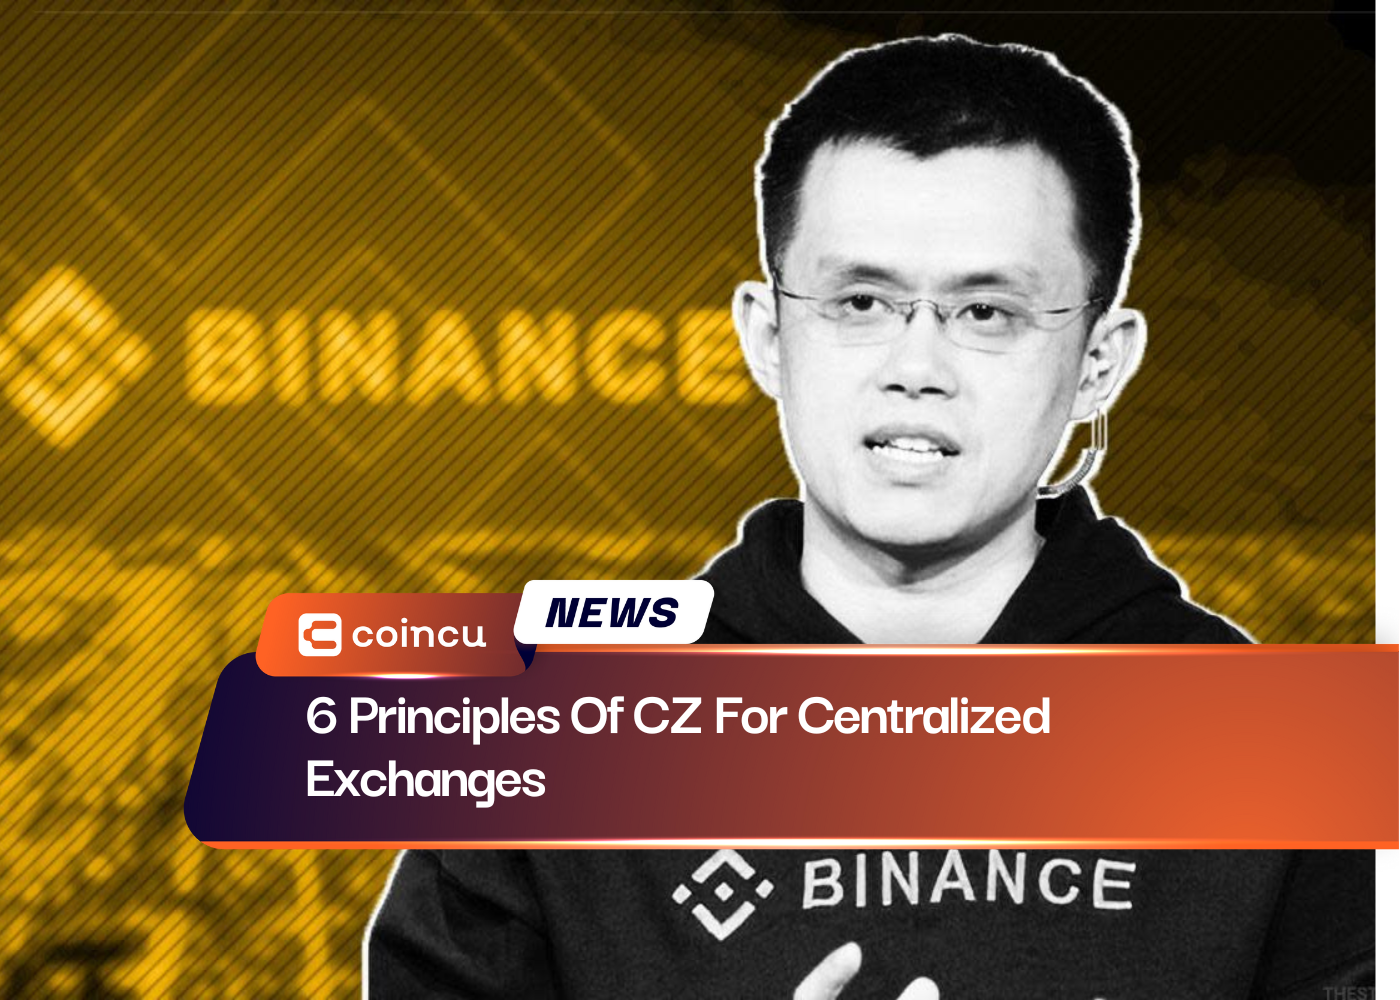 6 Principles Of CZ For Centralized Exchanges